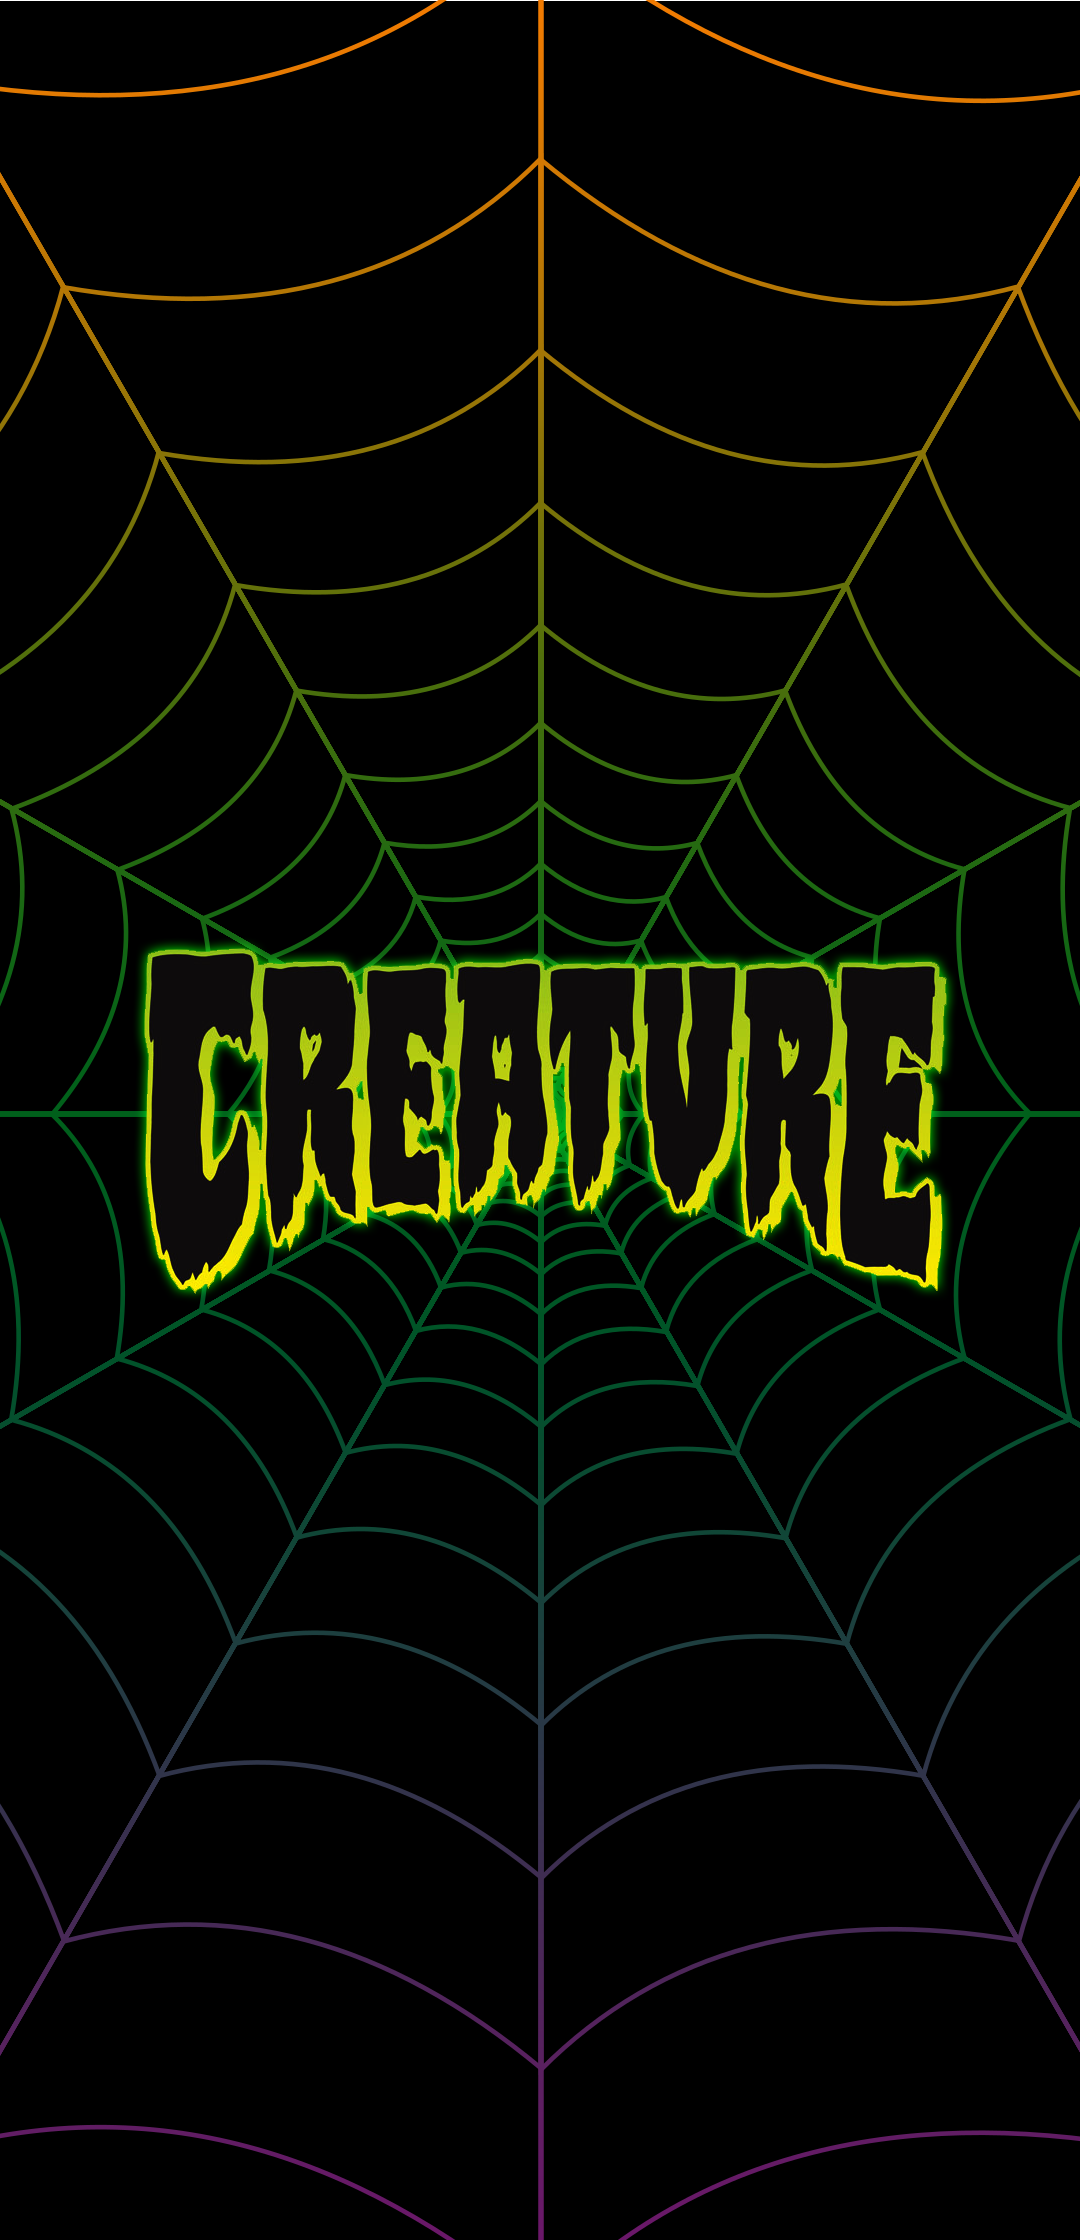 Creature Skateboards Wallpapers